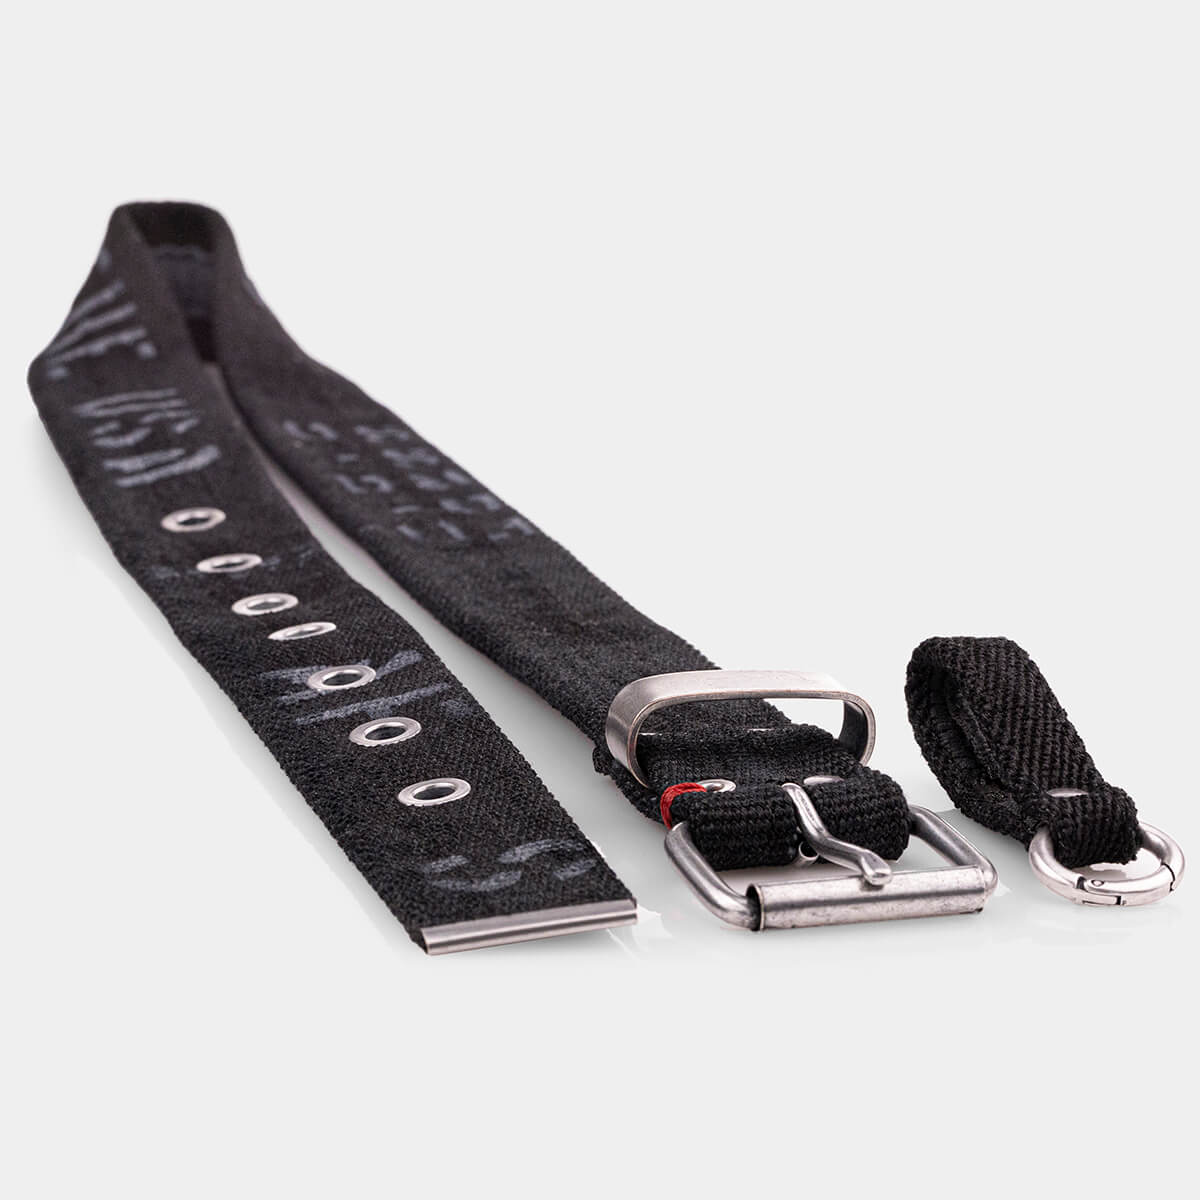 In The USA Black Edition Belt